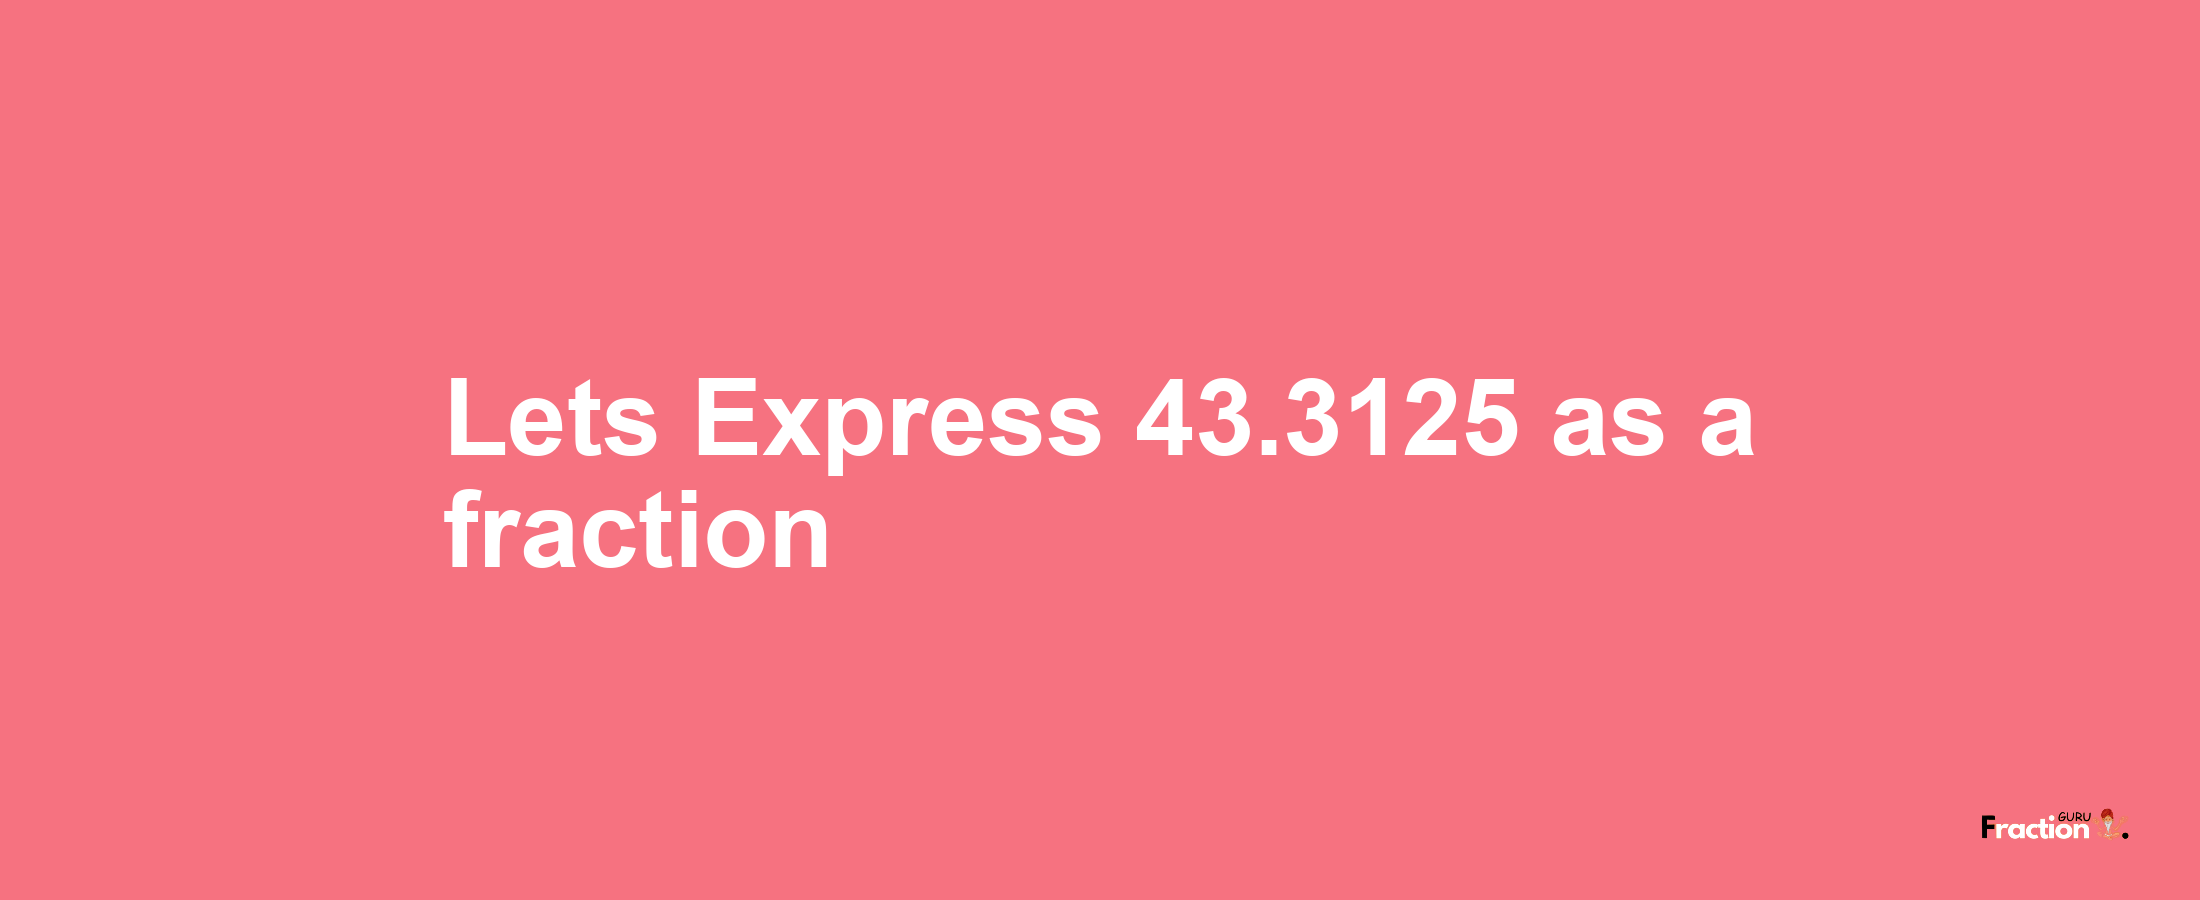 Lets Express 43.3125 as afraction